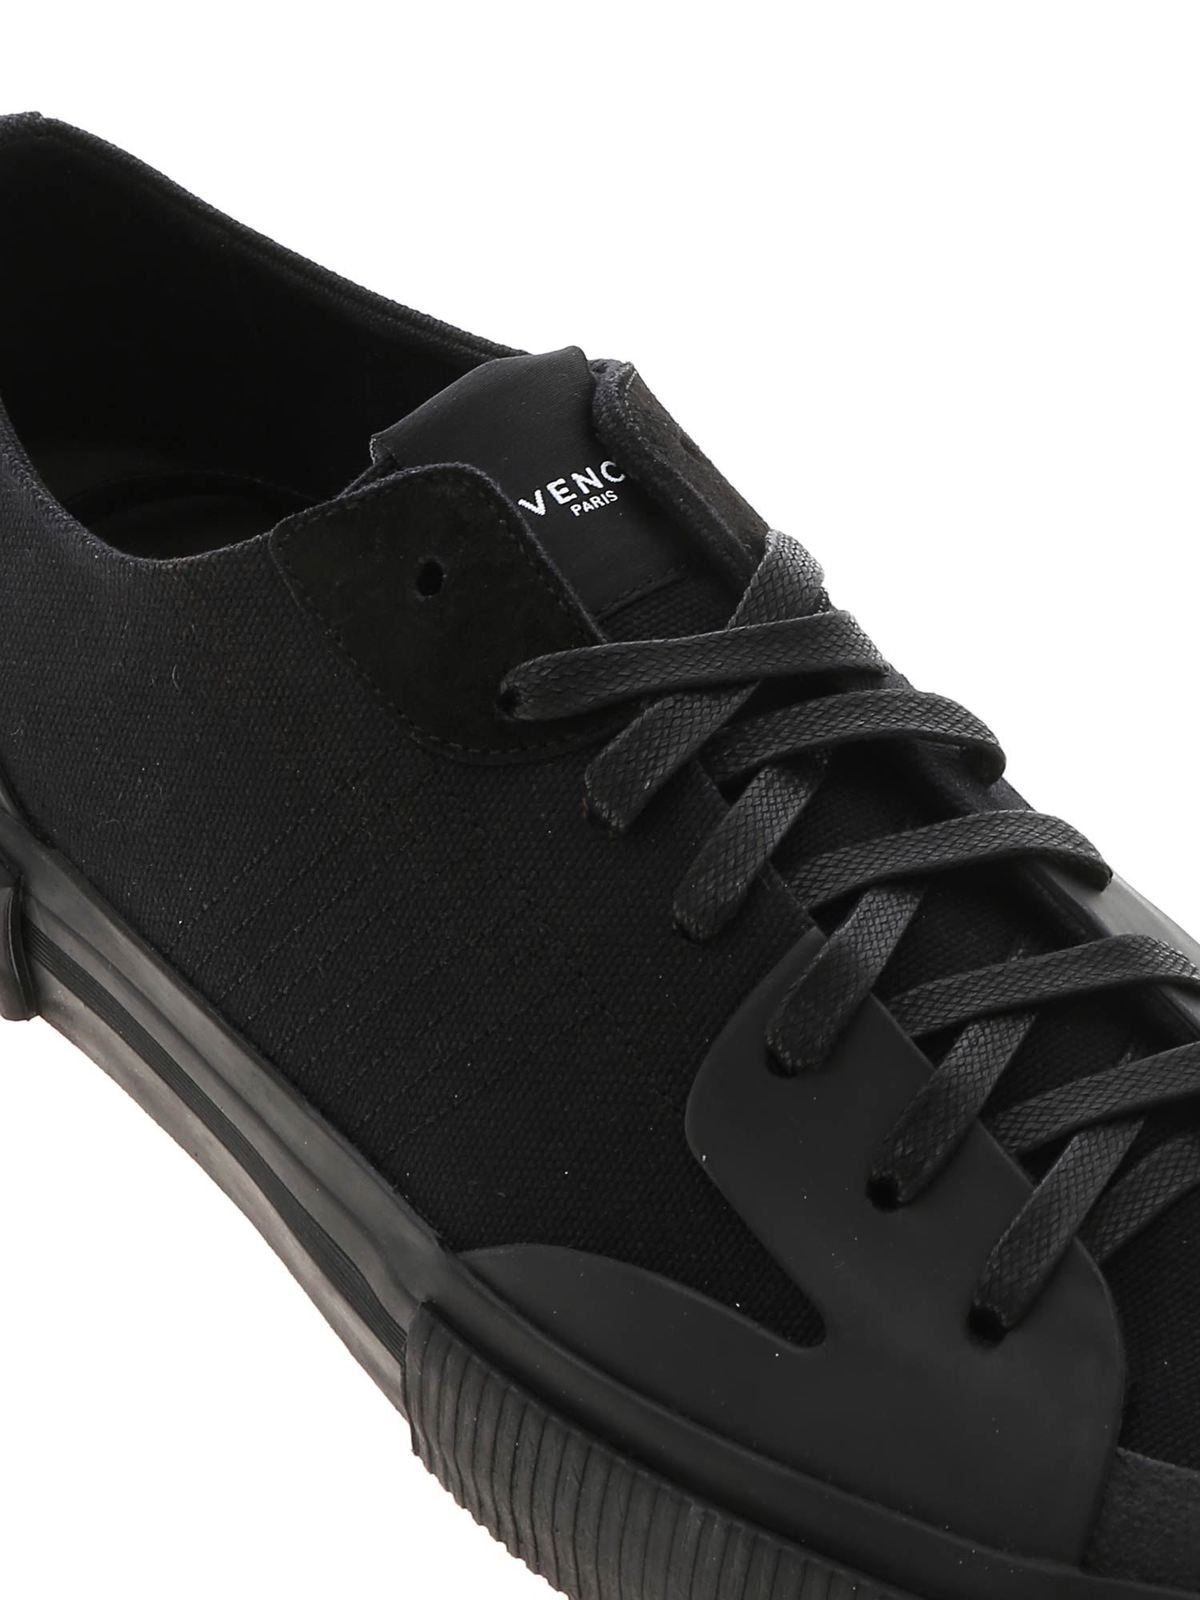 givenchy trainers black